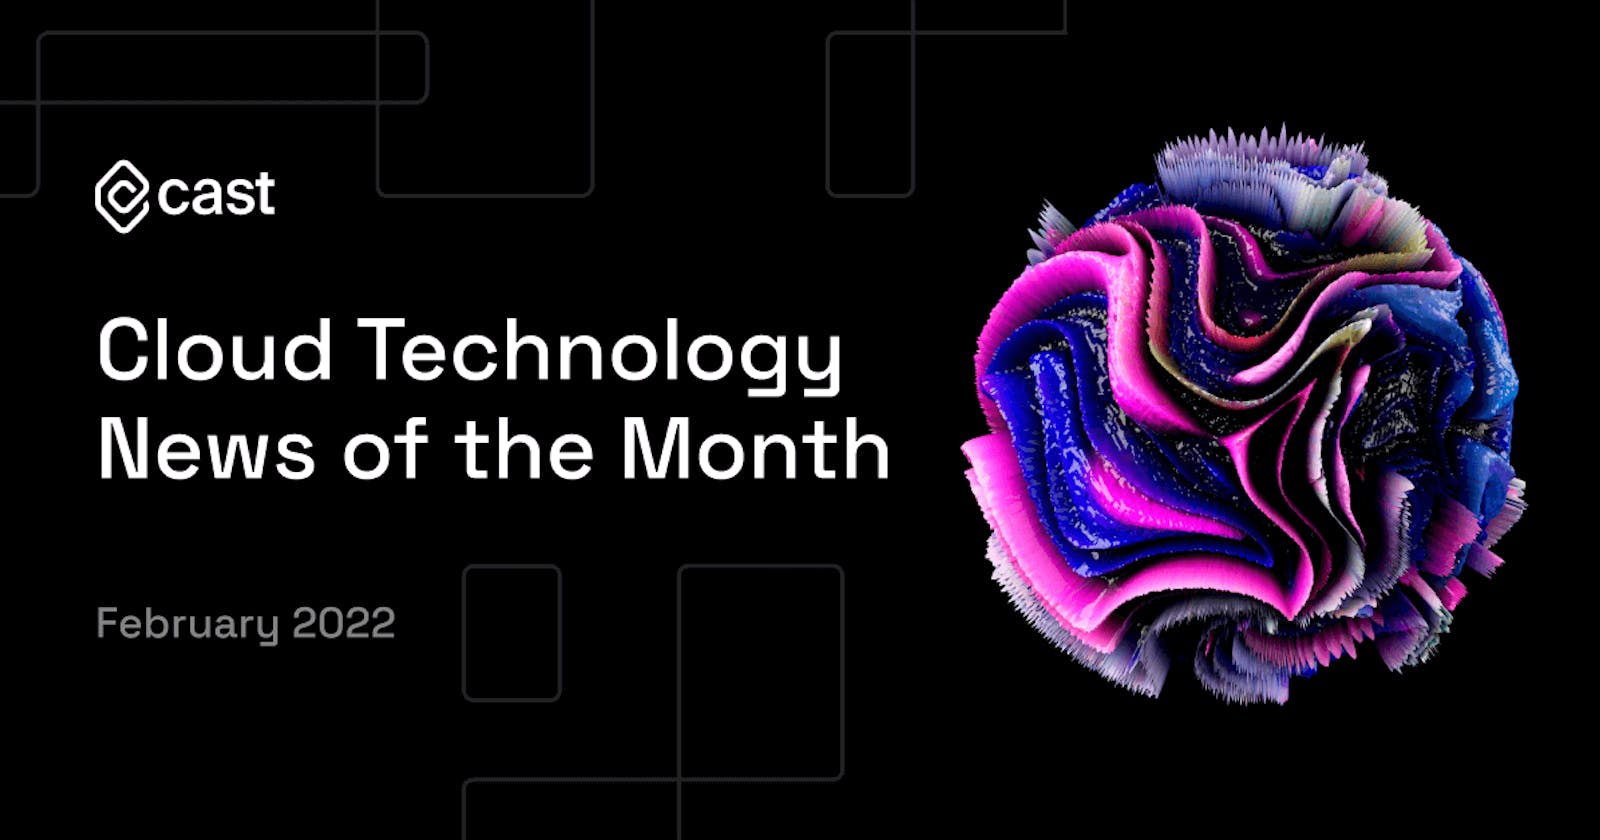 Cloud Technology News of the Month: February 2022